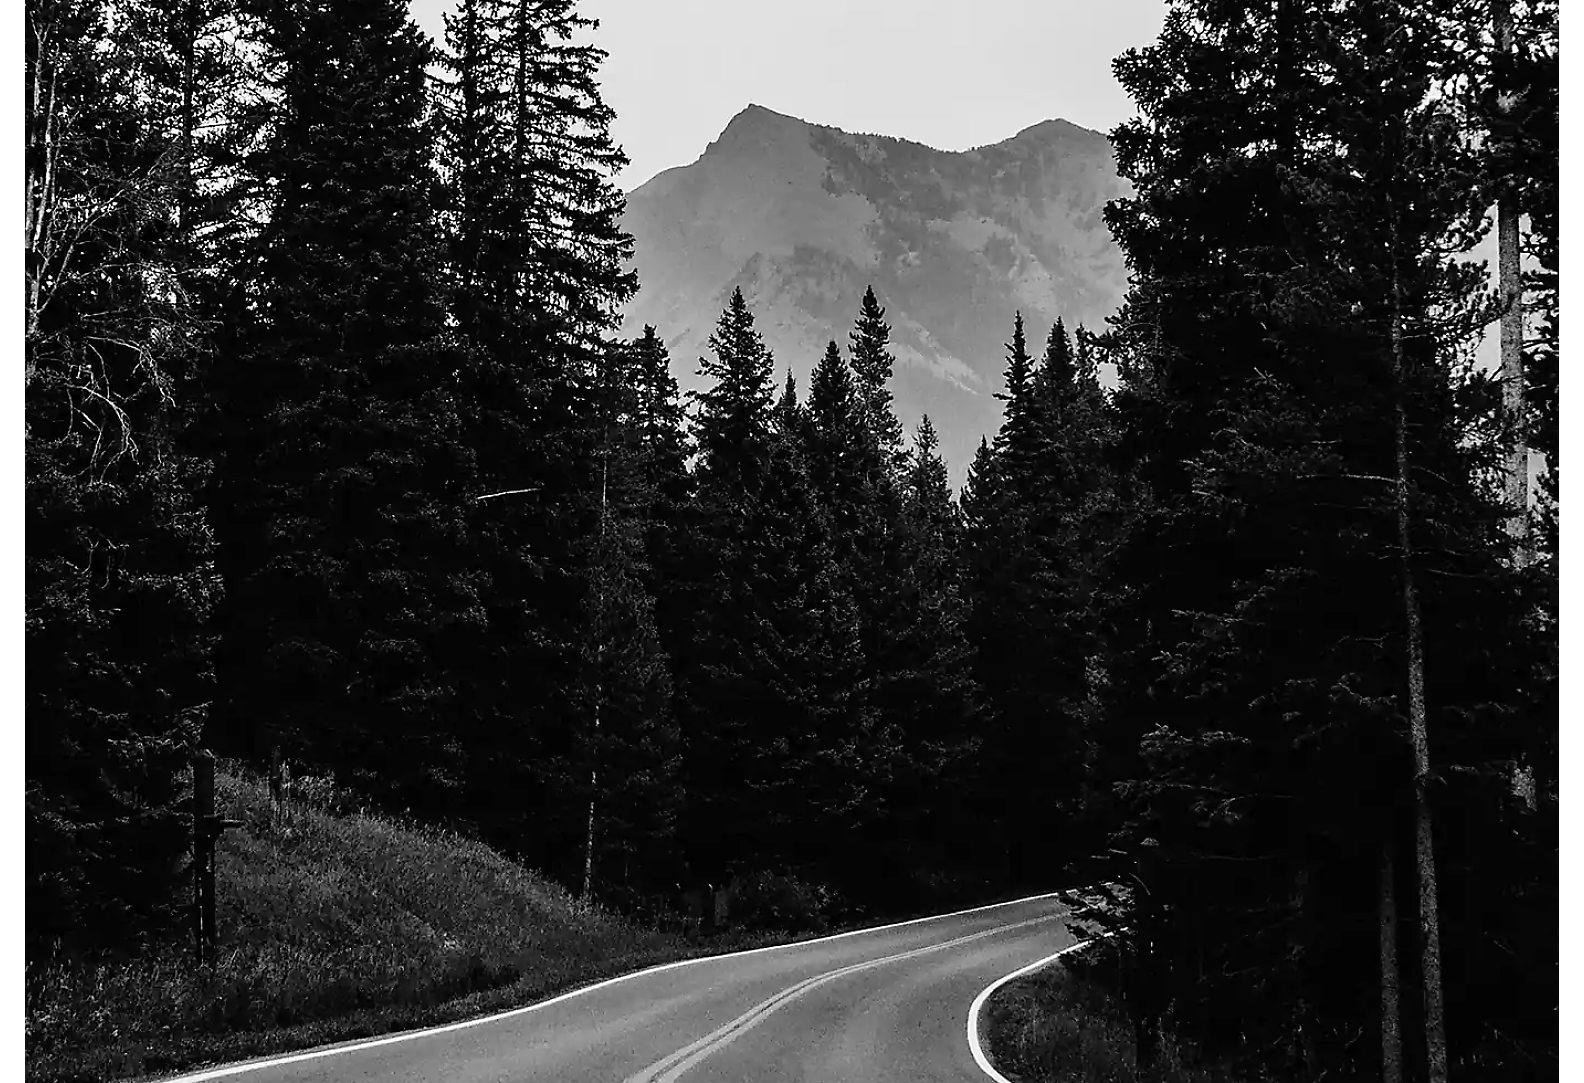 A two-lane road through a forest with a mountain peak in the background, in black and white.